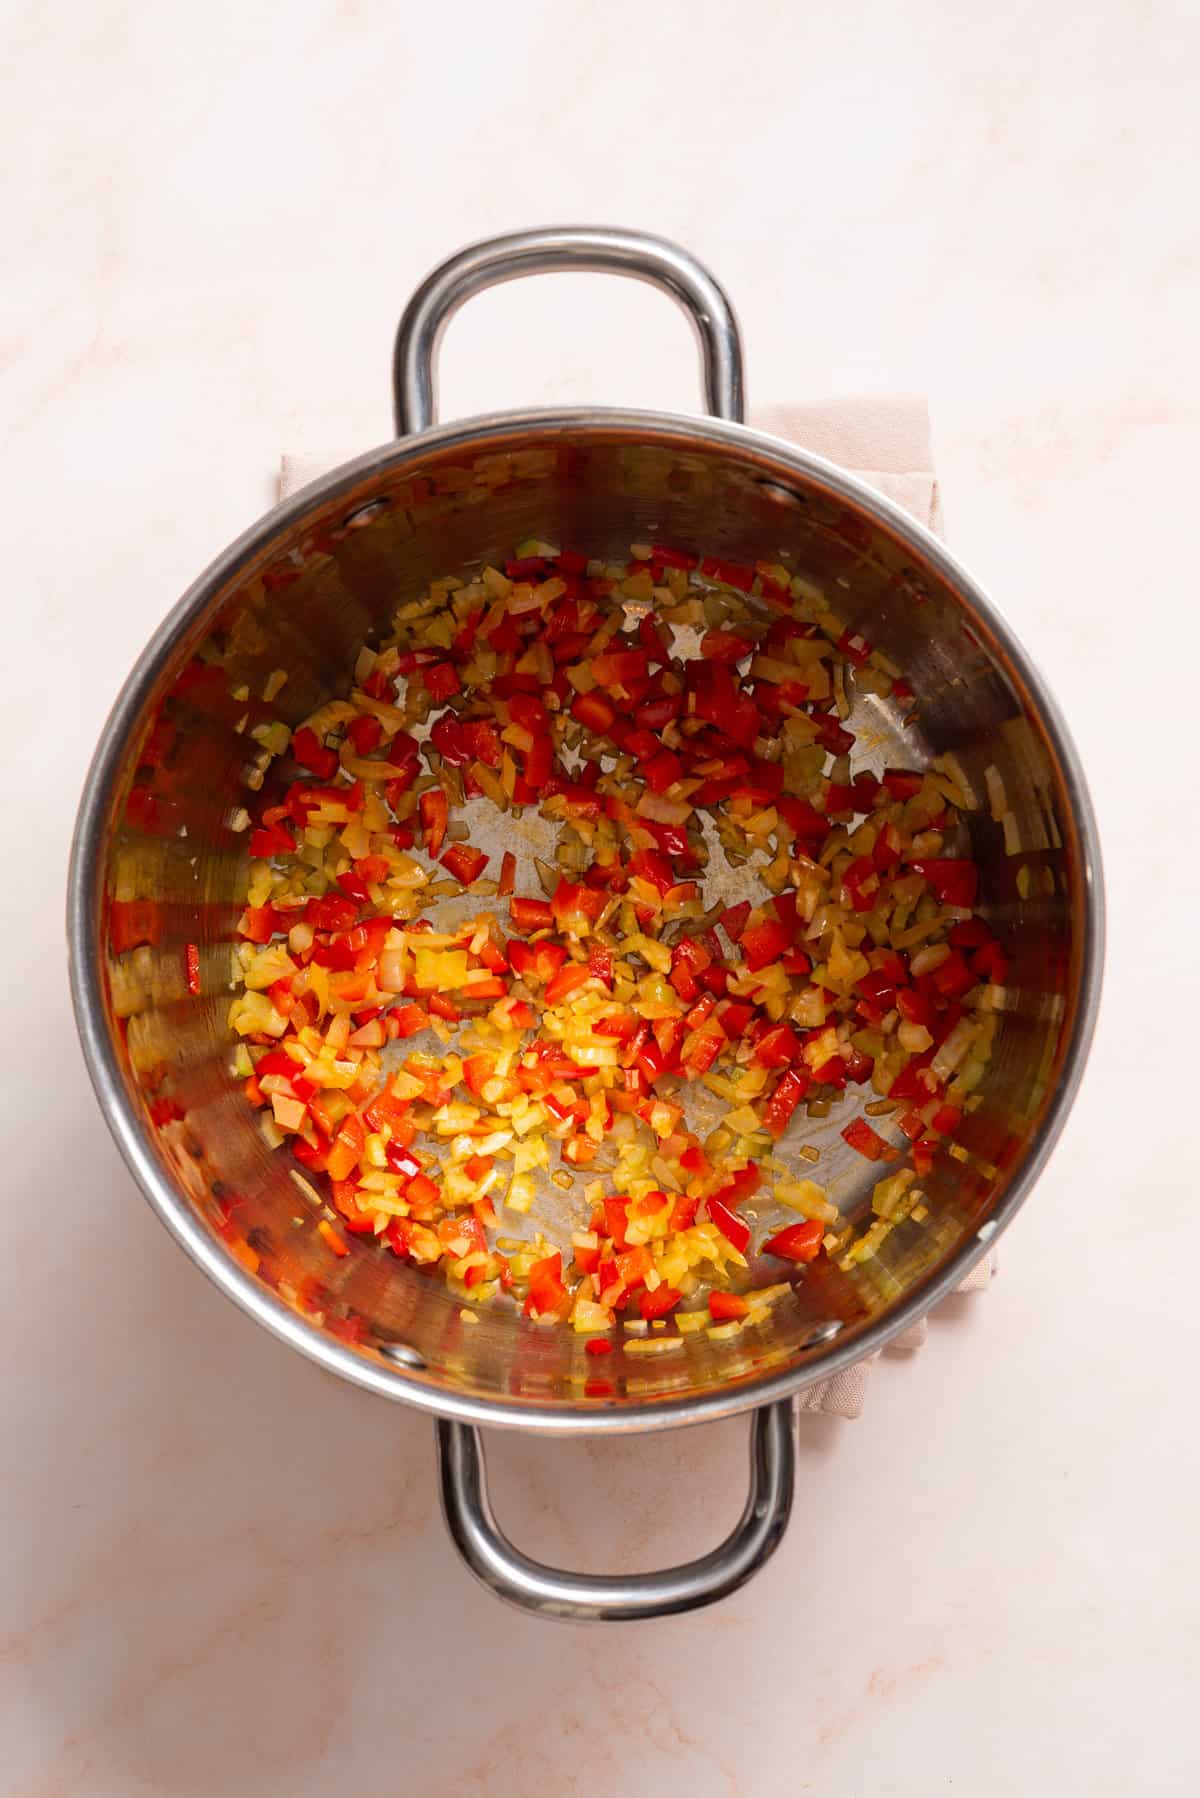 An overhead image of sauteed vegetables in a saucepan.